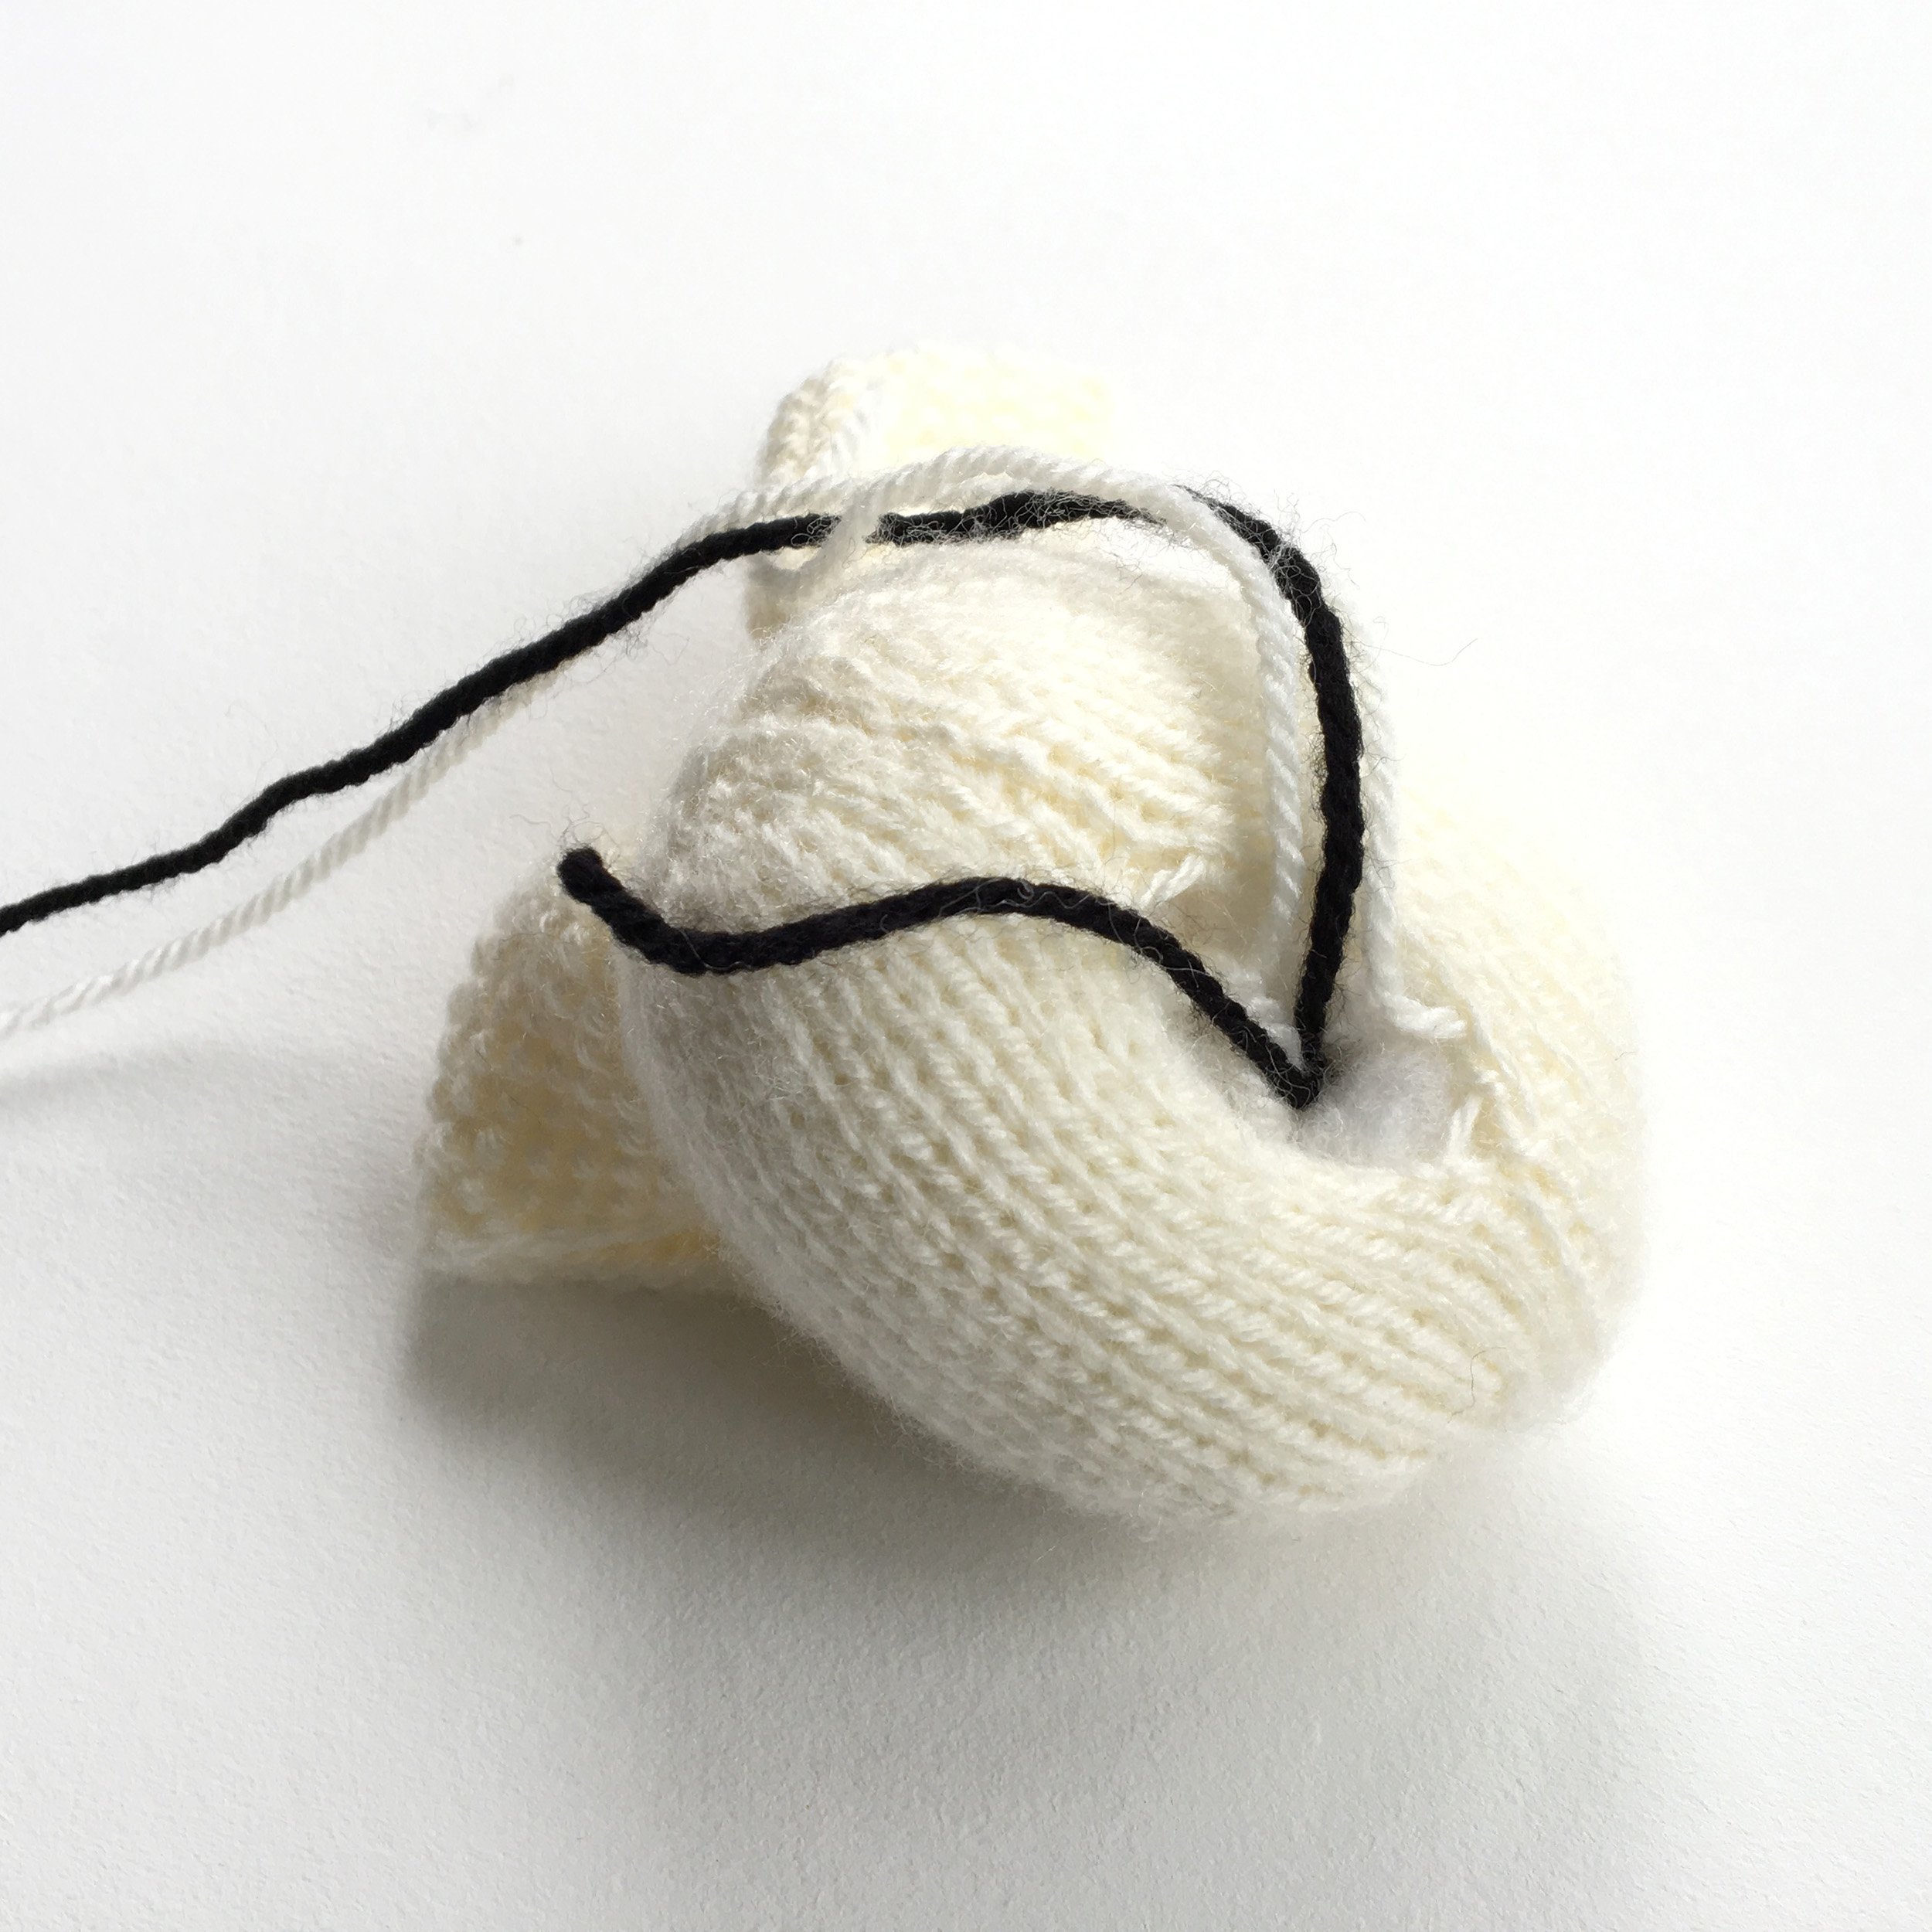 How to baby proof eyes and noses for stuffed animals #knit